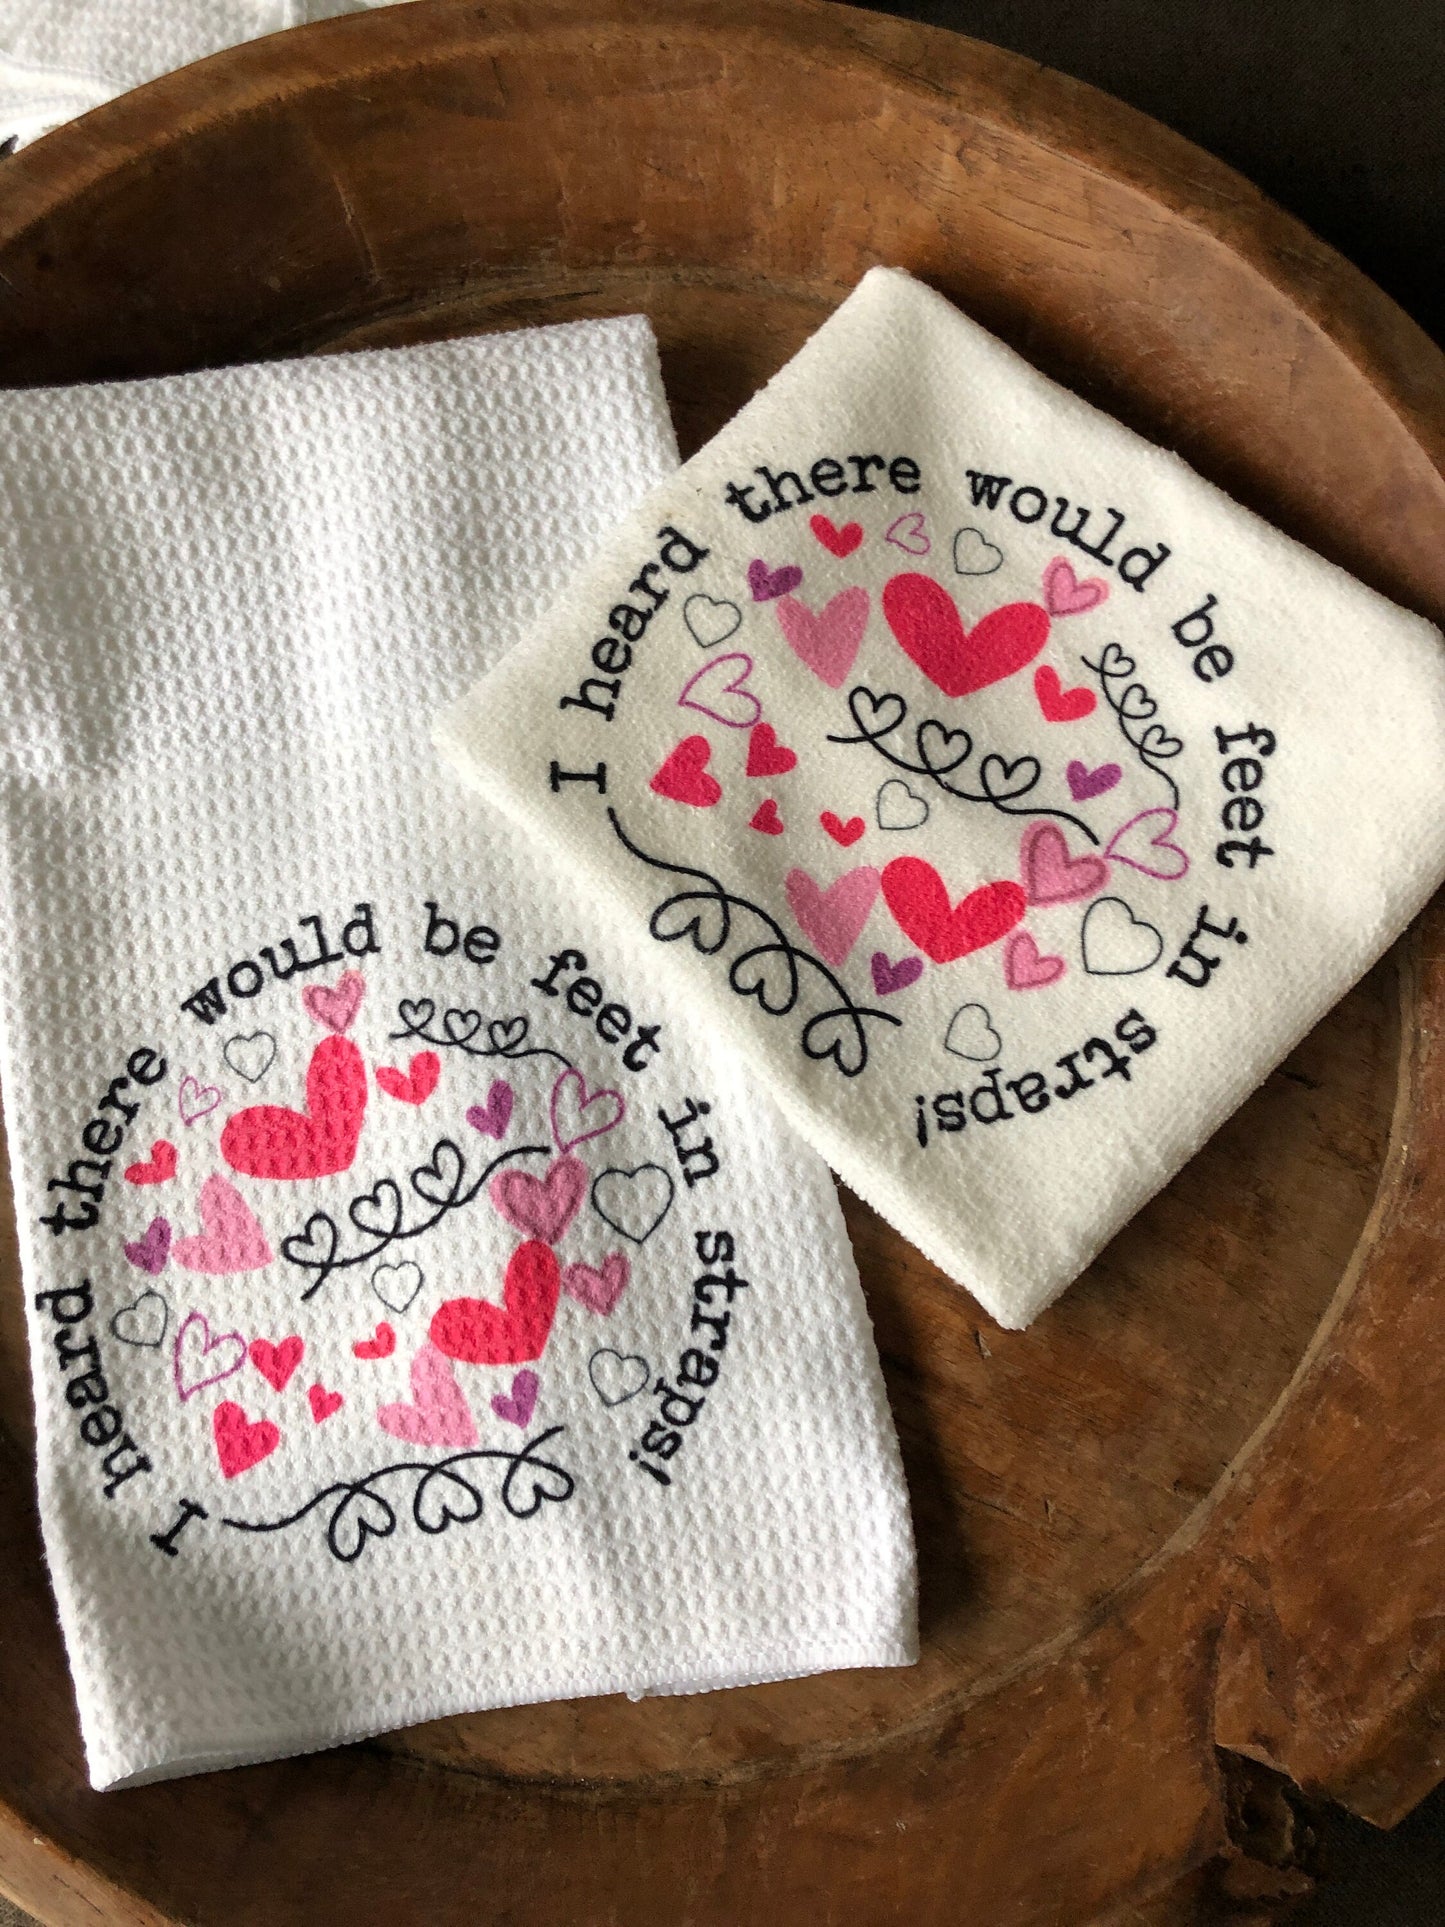 Pilates towel set "I heard there would be feet in straps" pilates gift,Pilates student gifts, Pilates Love, Pilates instructor gift, love